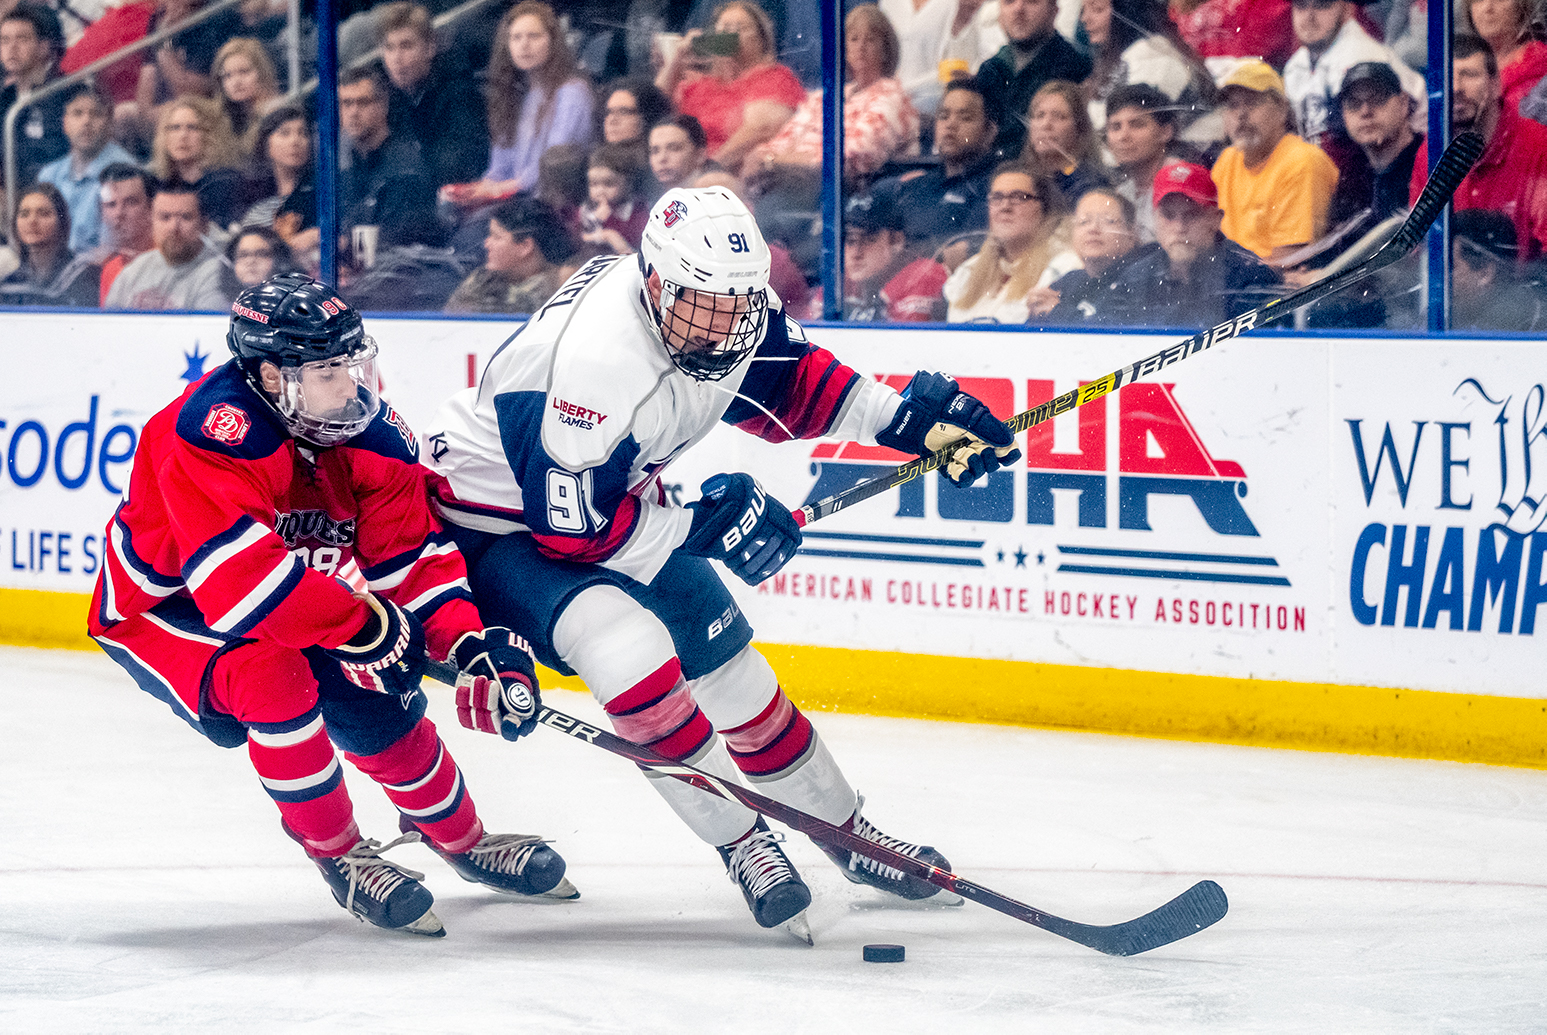 Liberty Men’s hockey opens season with 111 home victory over Dukes